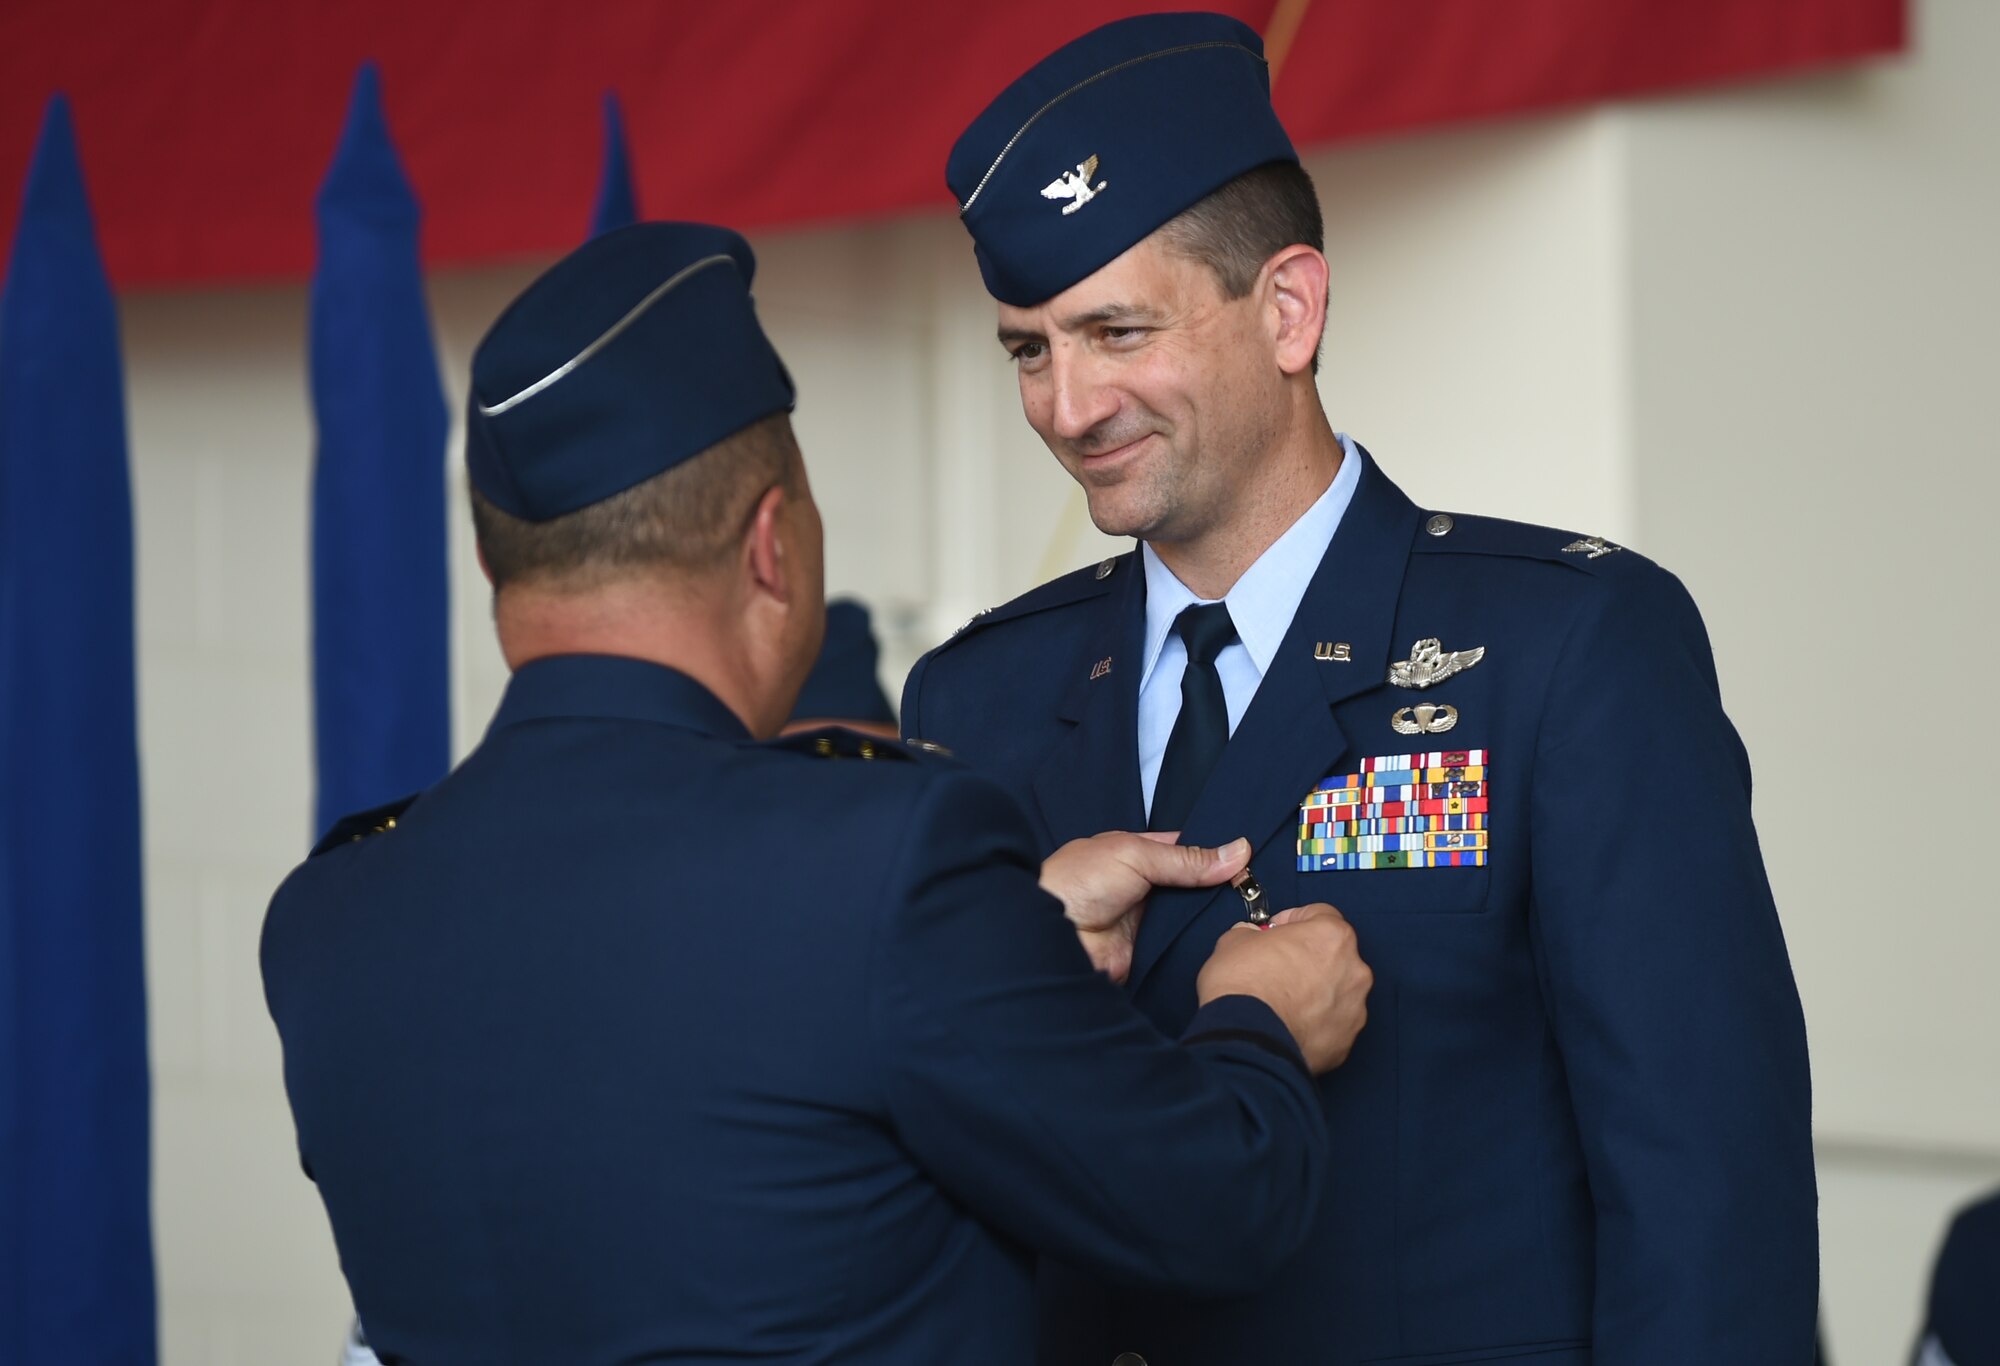 U.S. Air Force Col. Stephen Hodge, right, 317th Airlift Group commander, is awarded the Legion of Merit by Lt. Gen. Giovanni Tuck, 18th Air Force commander, at Dyess Air Force Base, Texas, July 6, 2017. The Legion of Merit is awarded for exceptionally meritorious conduct in performance of outstanding services. The performance recognizes key individuals for service rendered in a clearly exceptional manner. (U.S. Air Force photo by Airman 1st Class Emily Copeland)